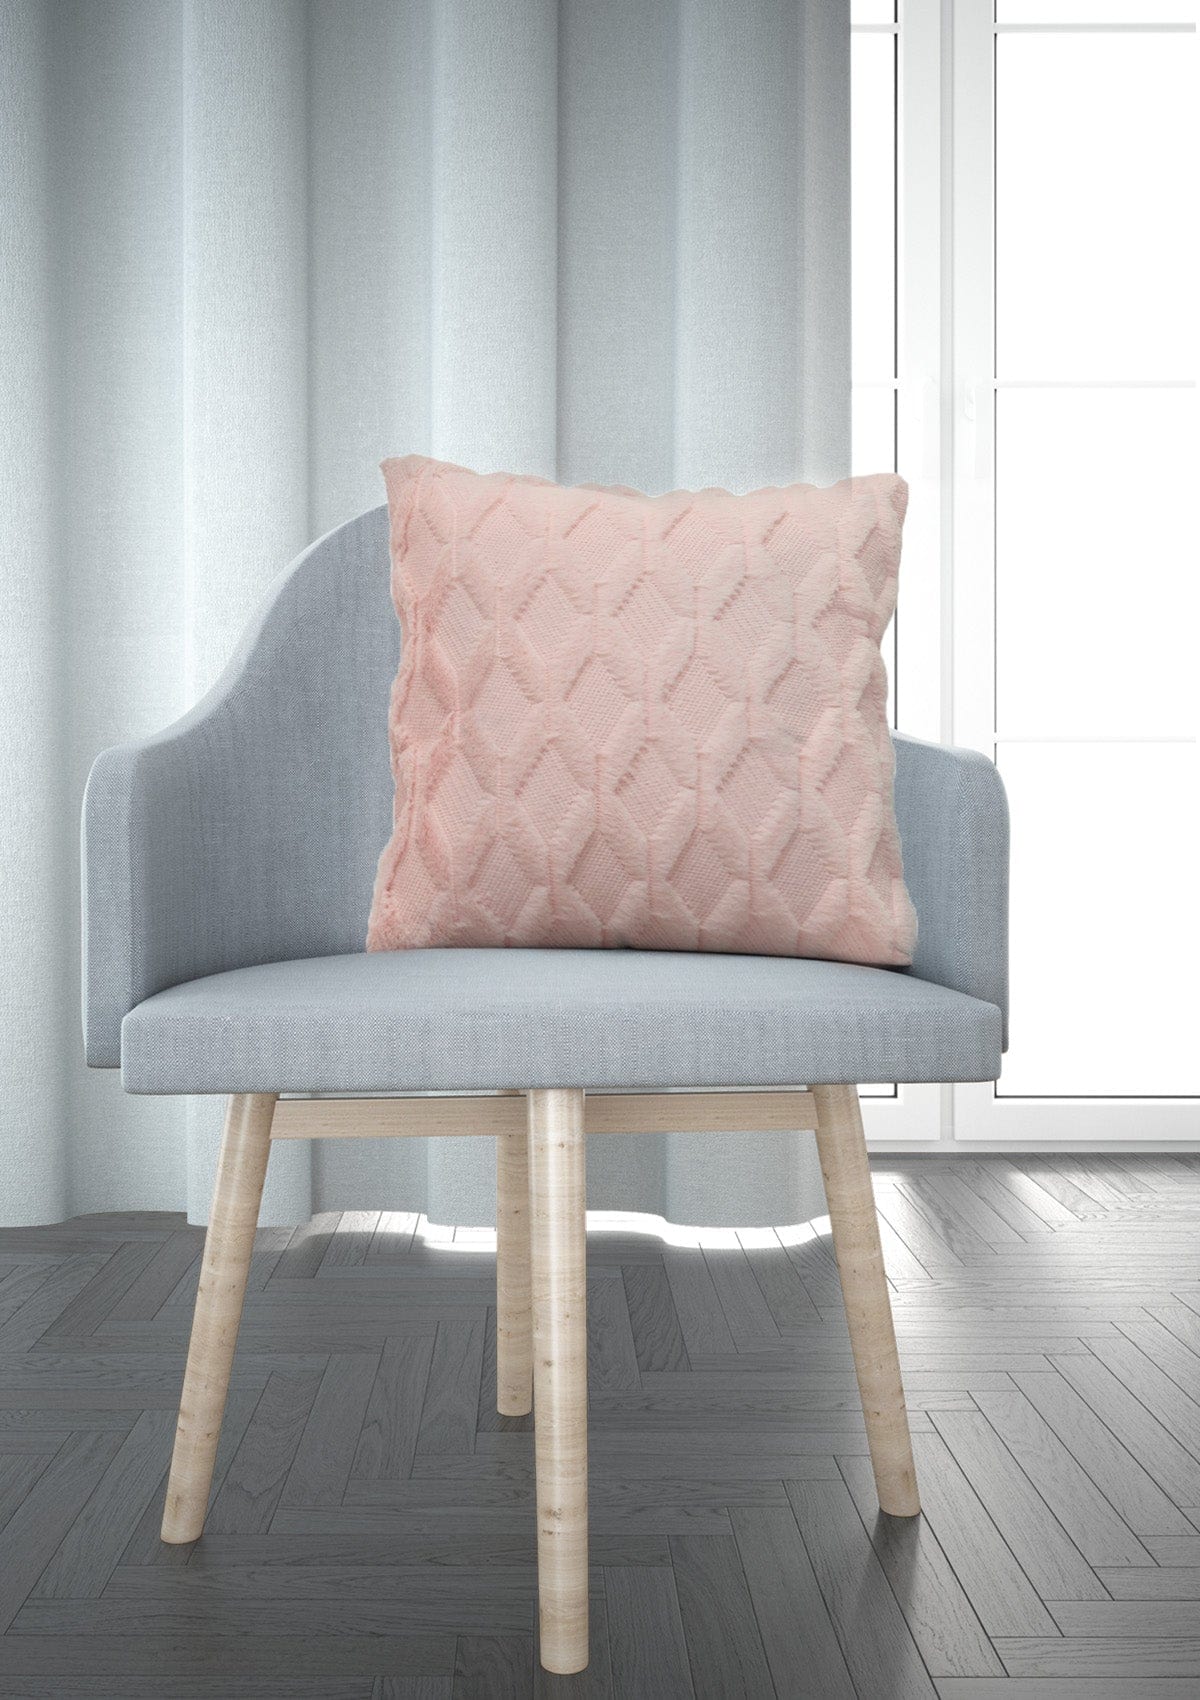 Pink Fluffy Cushion Cover | CovermyCushion 30x50cm / LightPink / No thanks - cover only